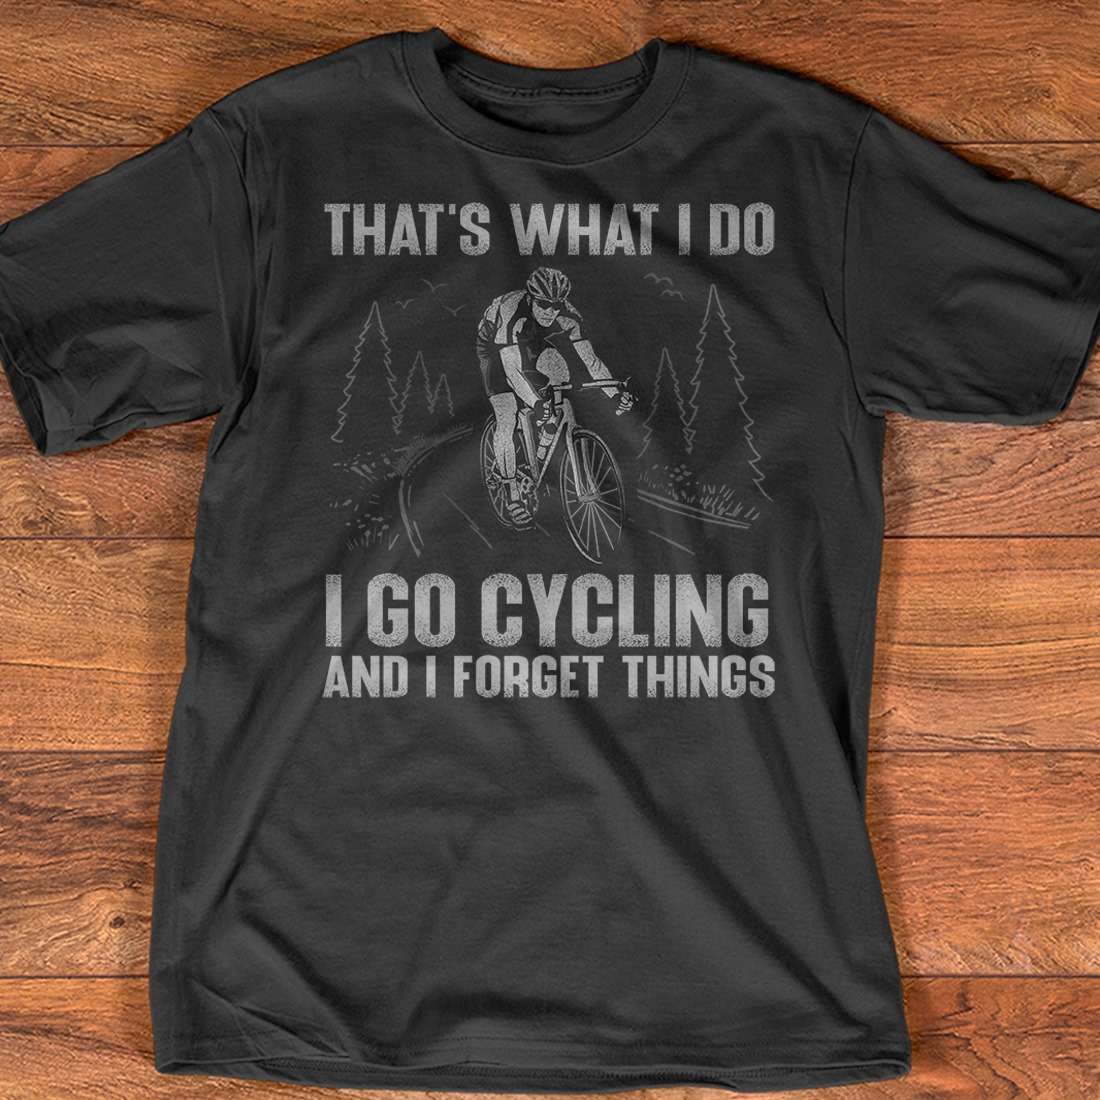 That's what I do I go cycling and I forget things - Gift for bikers, go cycling the hobby